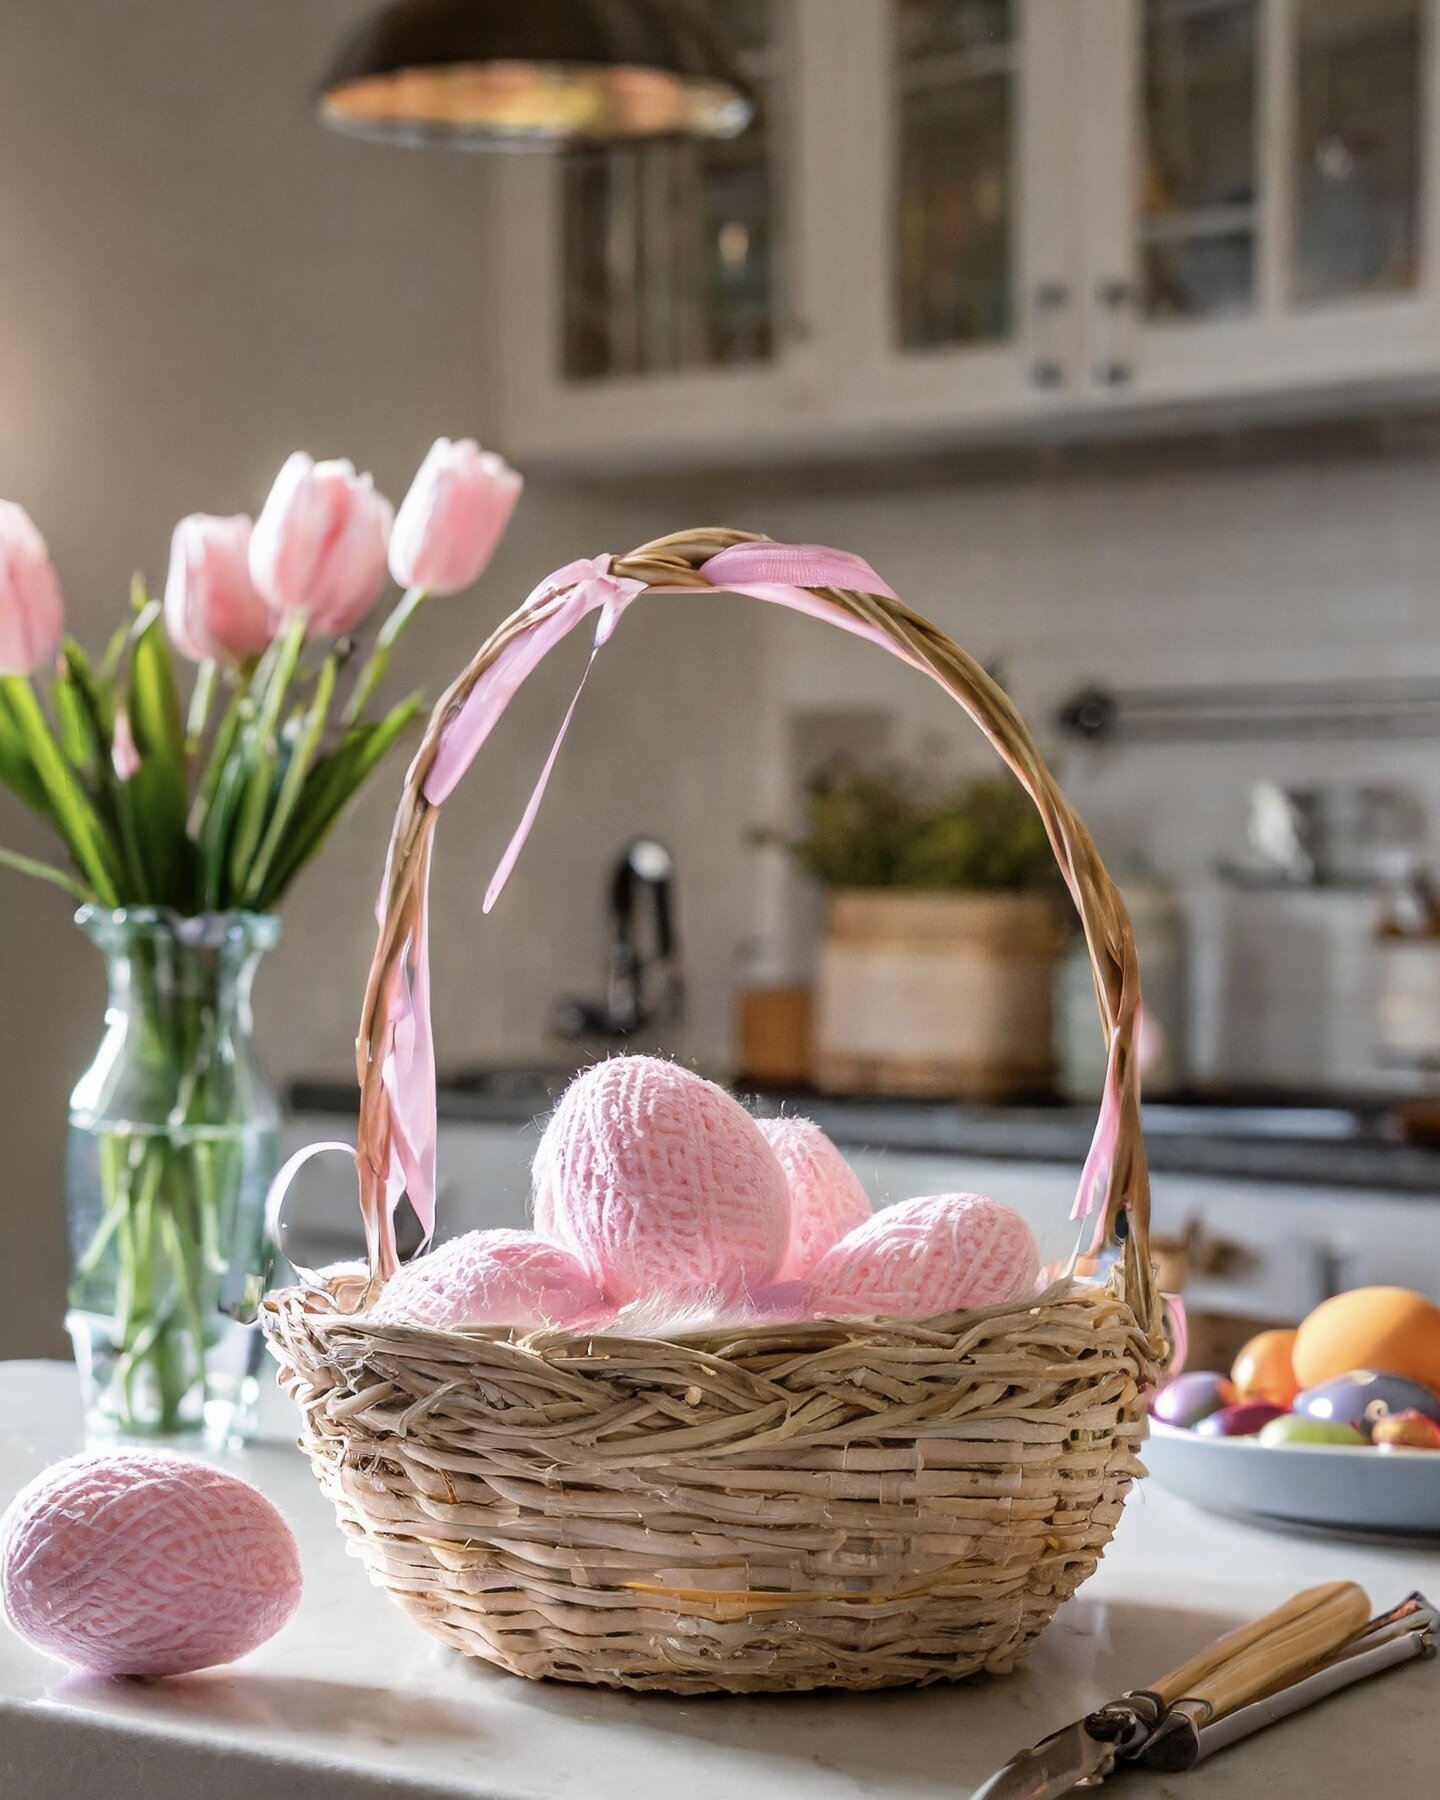 Happy Easter, if you celebrate. I hope your basket was full of yarn!

🐣🌷🌱

#knitting #knittersofinstagram #yarnlove #knitehatyoulove #springknitting